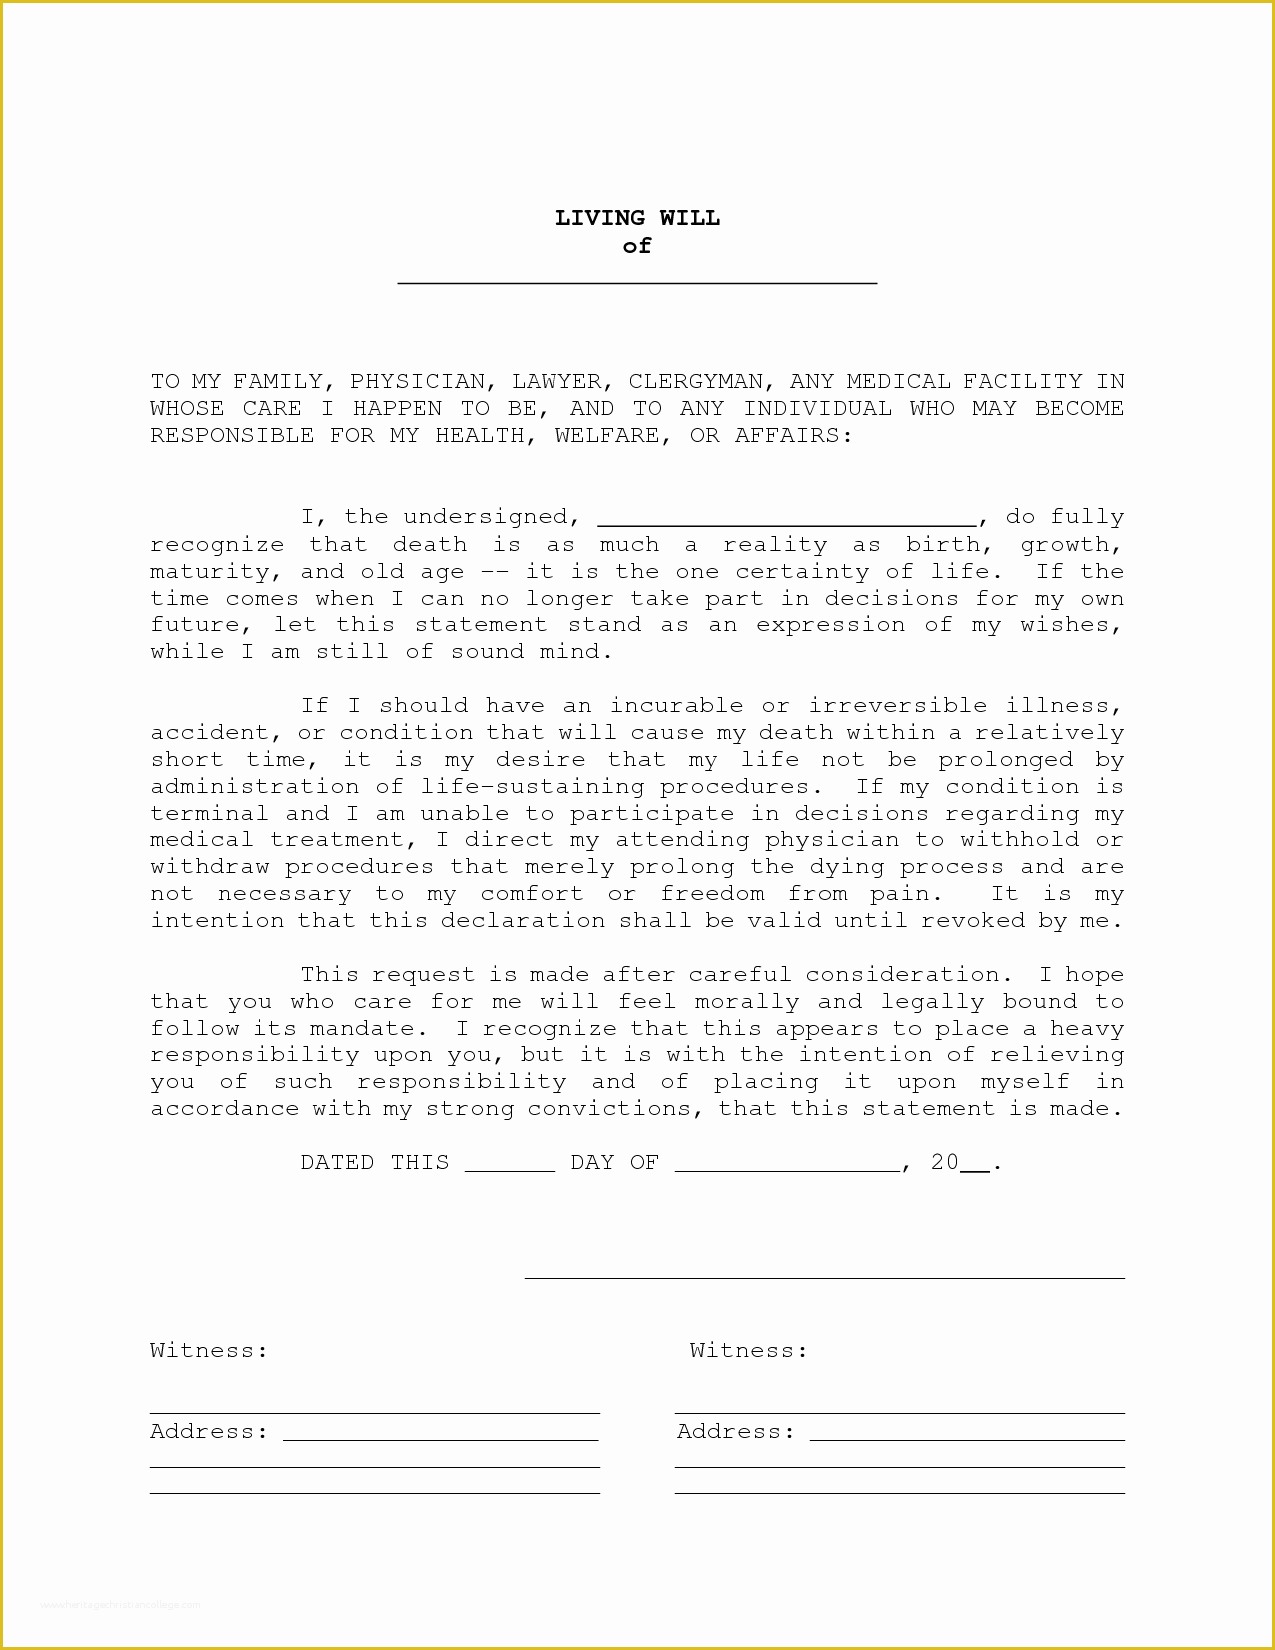 Free Florida Will Templates Of Living Will Sample Free Printable Documents